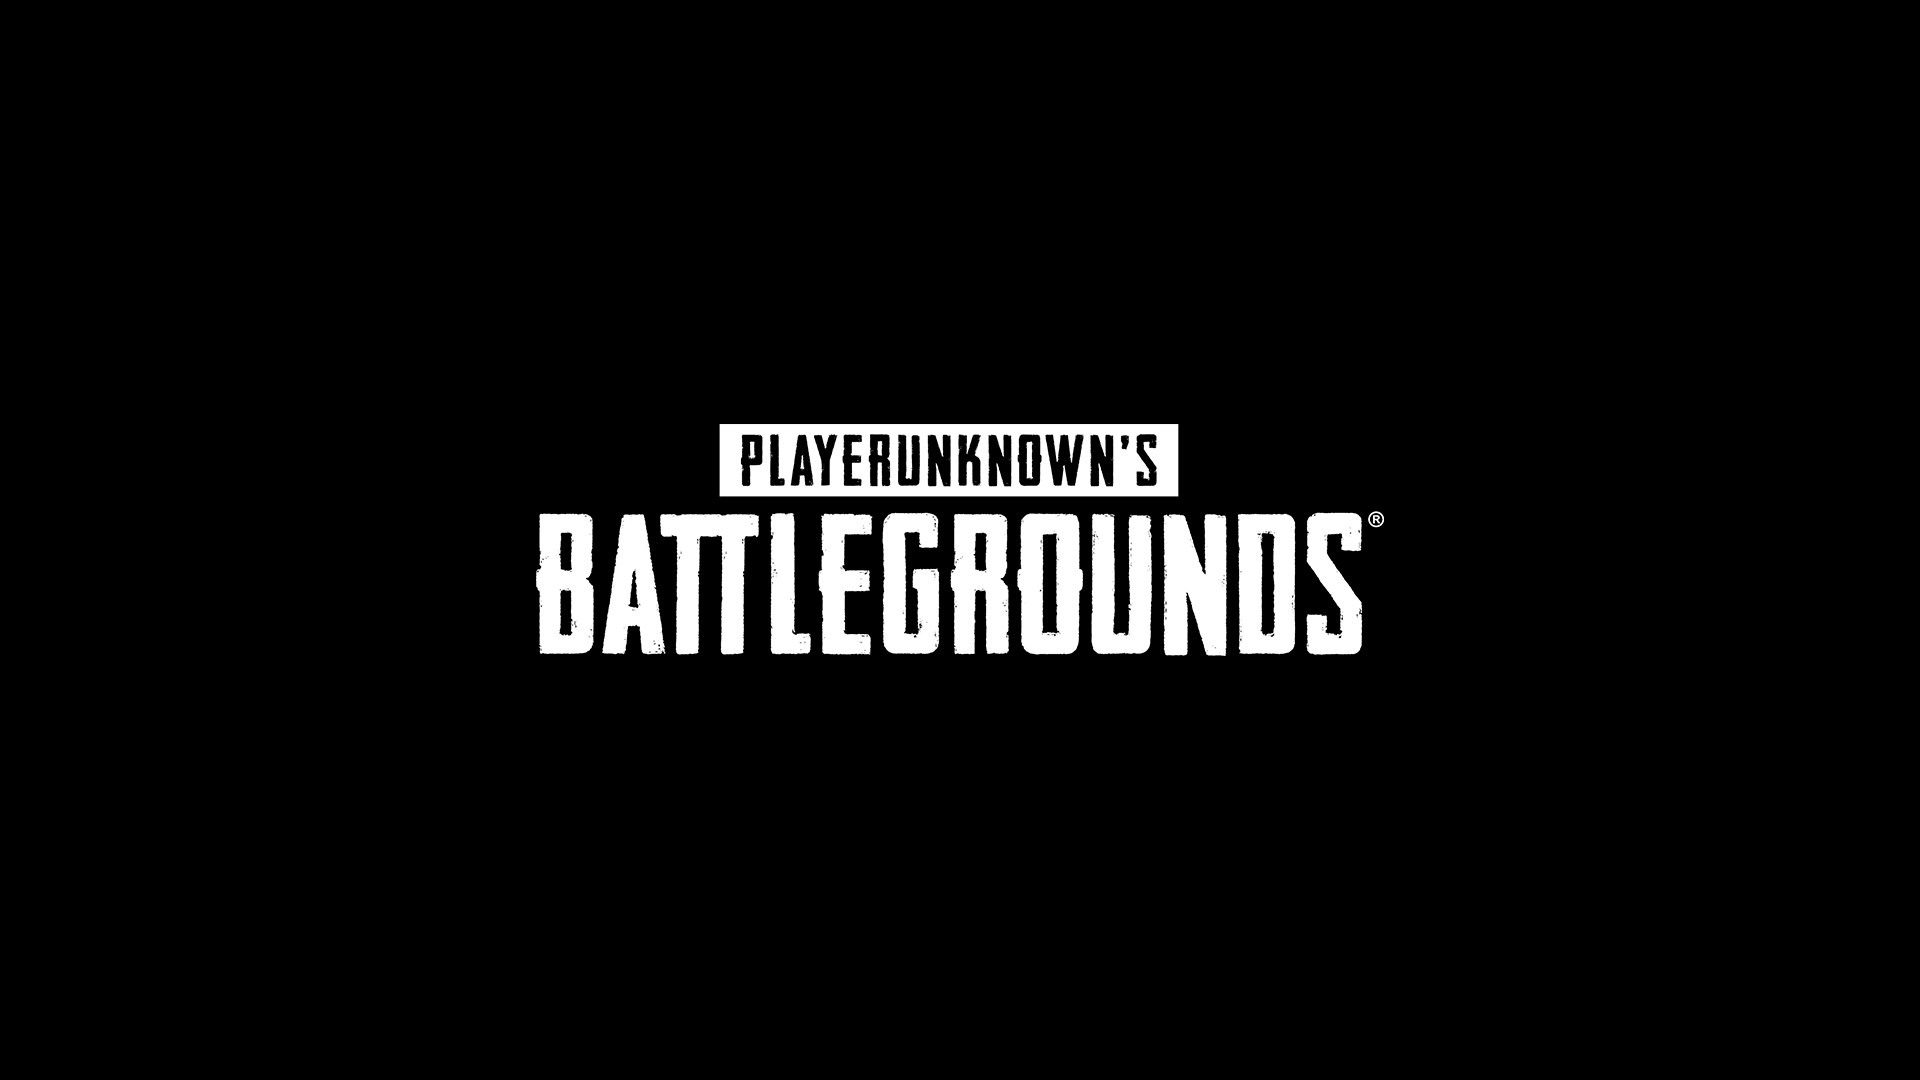 Pubg Battlegrounds Europe Console We Ve Been Looking At The Matchmaking Times For Ranked Fpp And We Know That They Re Not Looking Too Great Fpp Players This Weekend We Want To Get